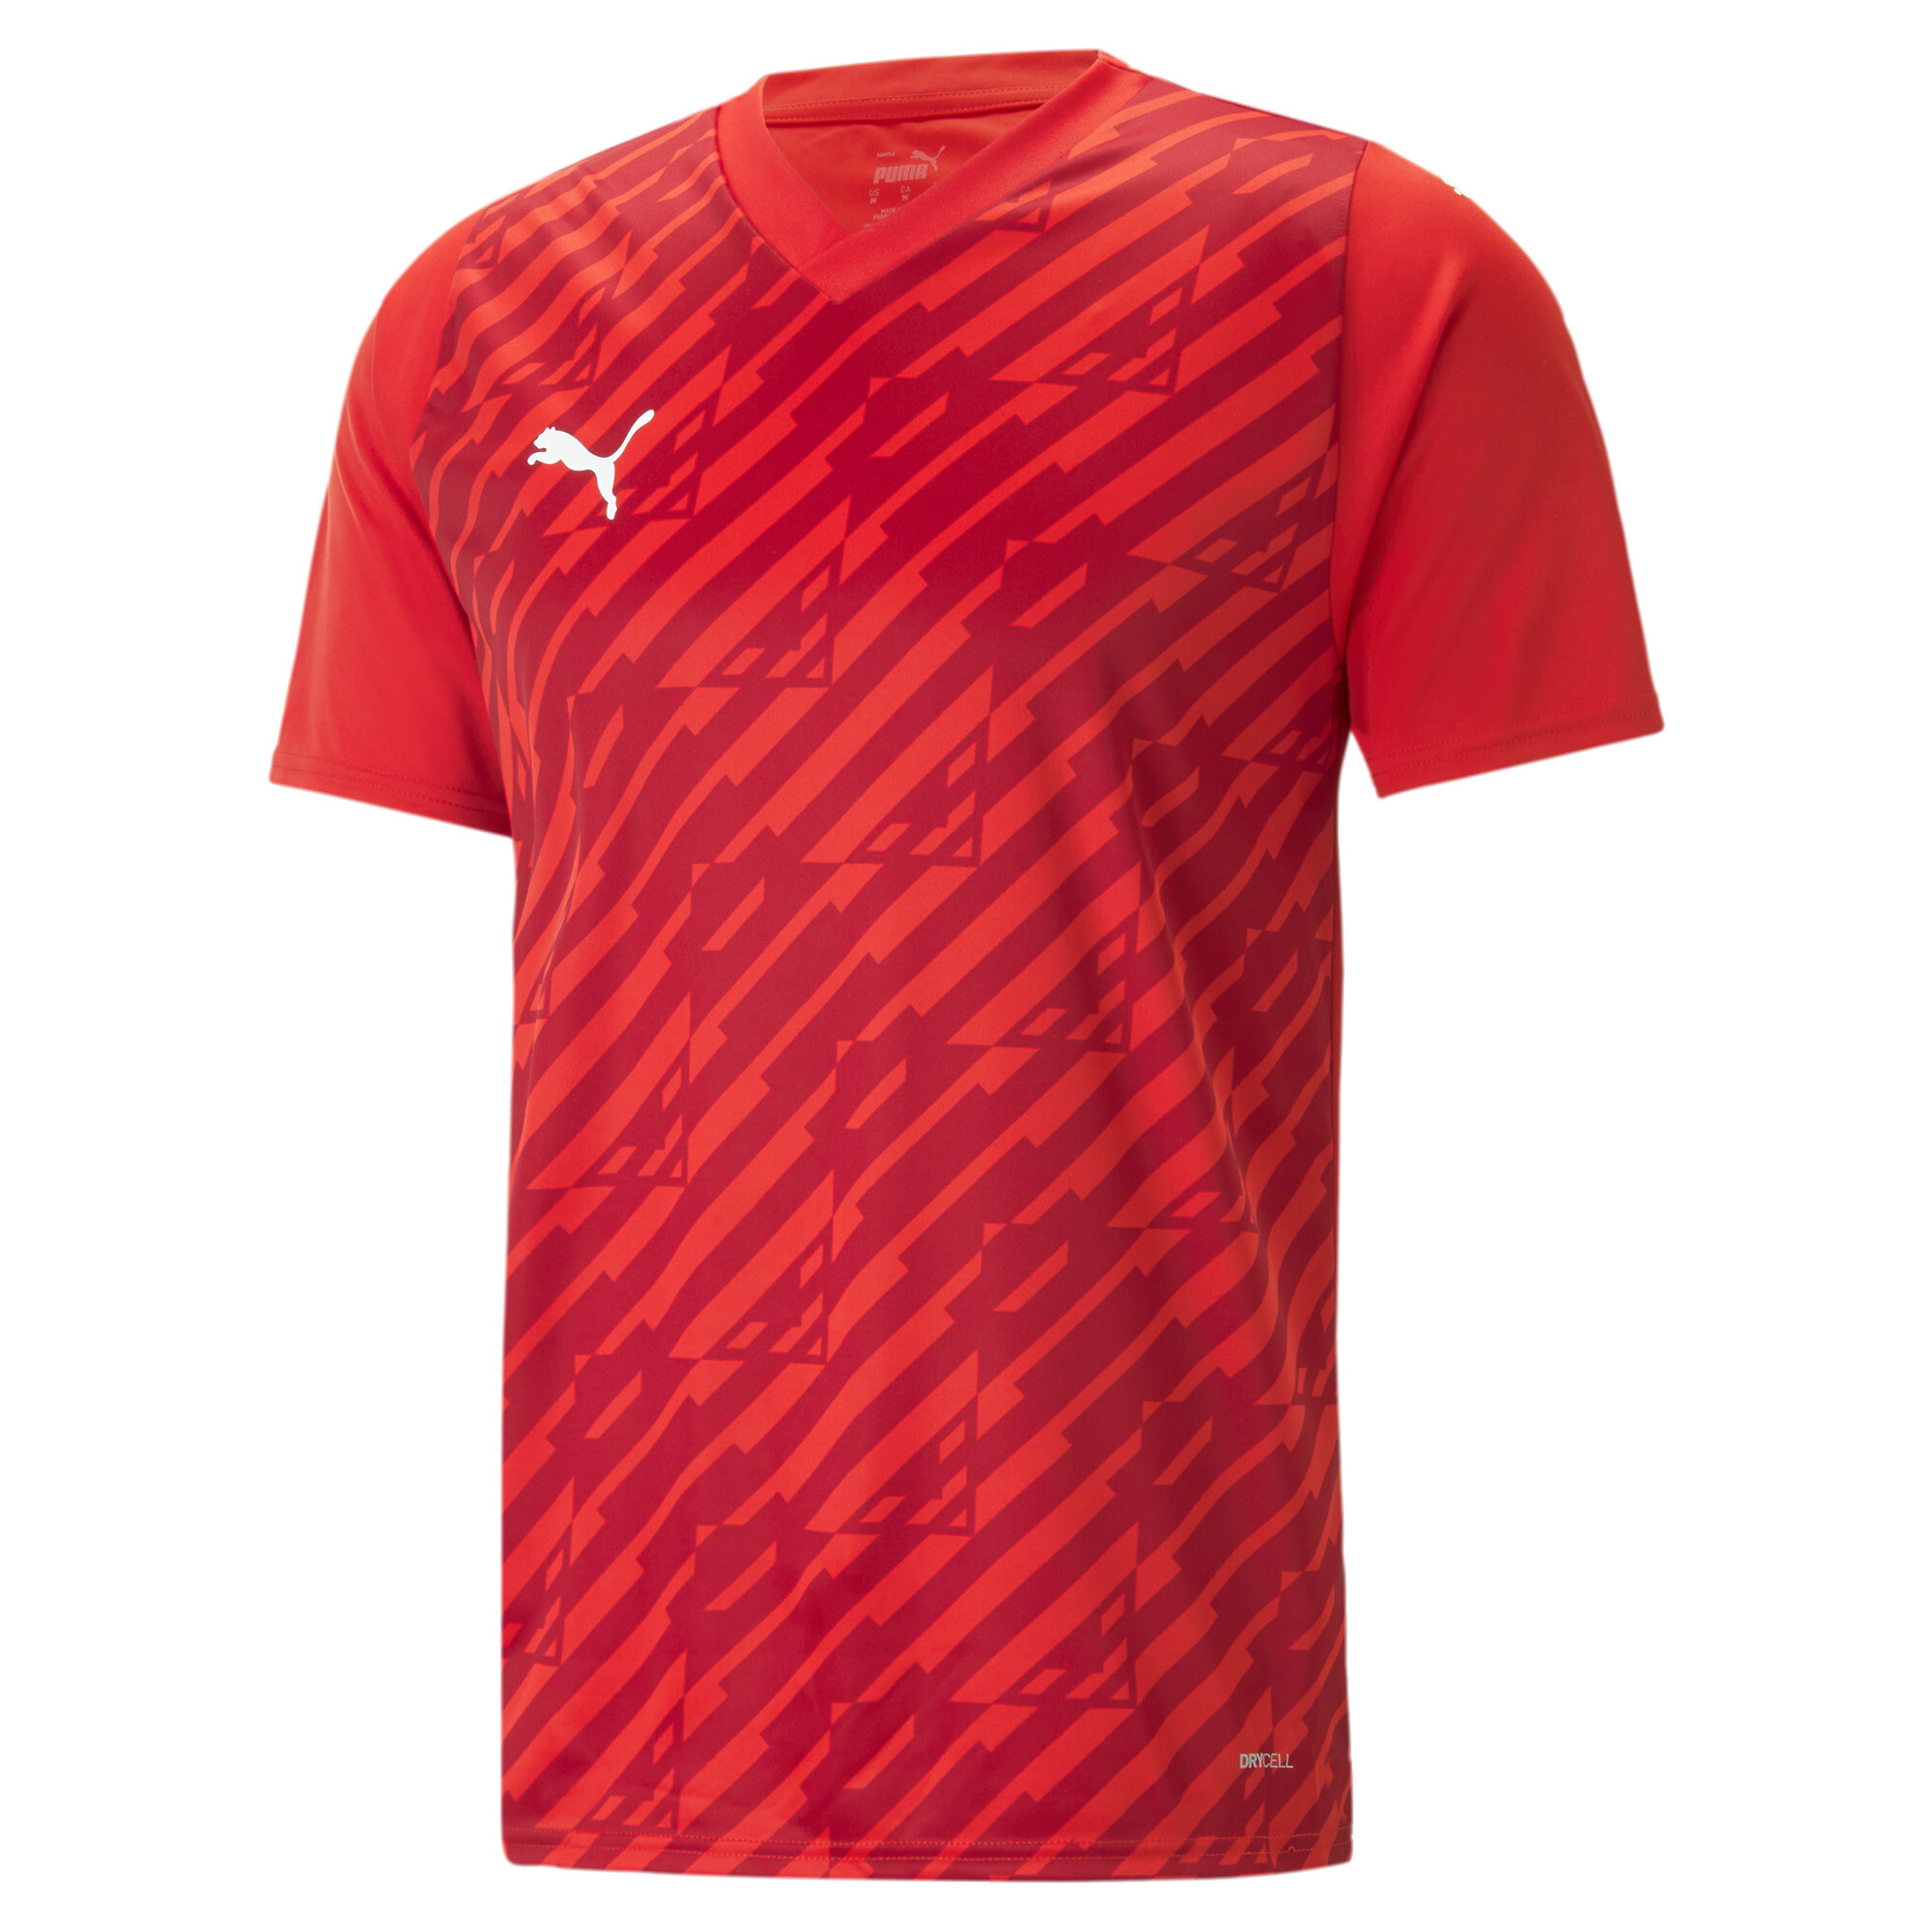 Men's Puma Team ULTIMATE Football Jersey, Red, Size S, Sport